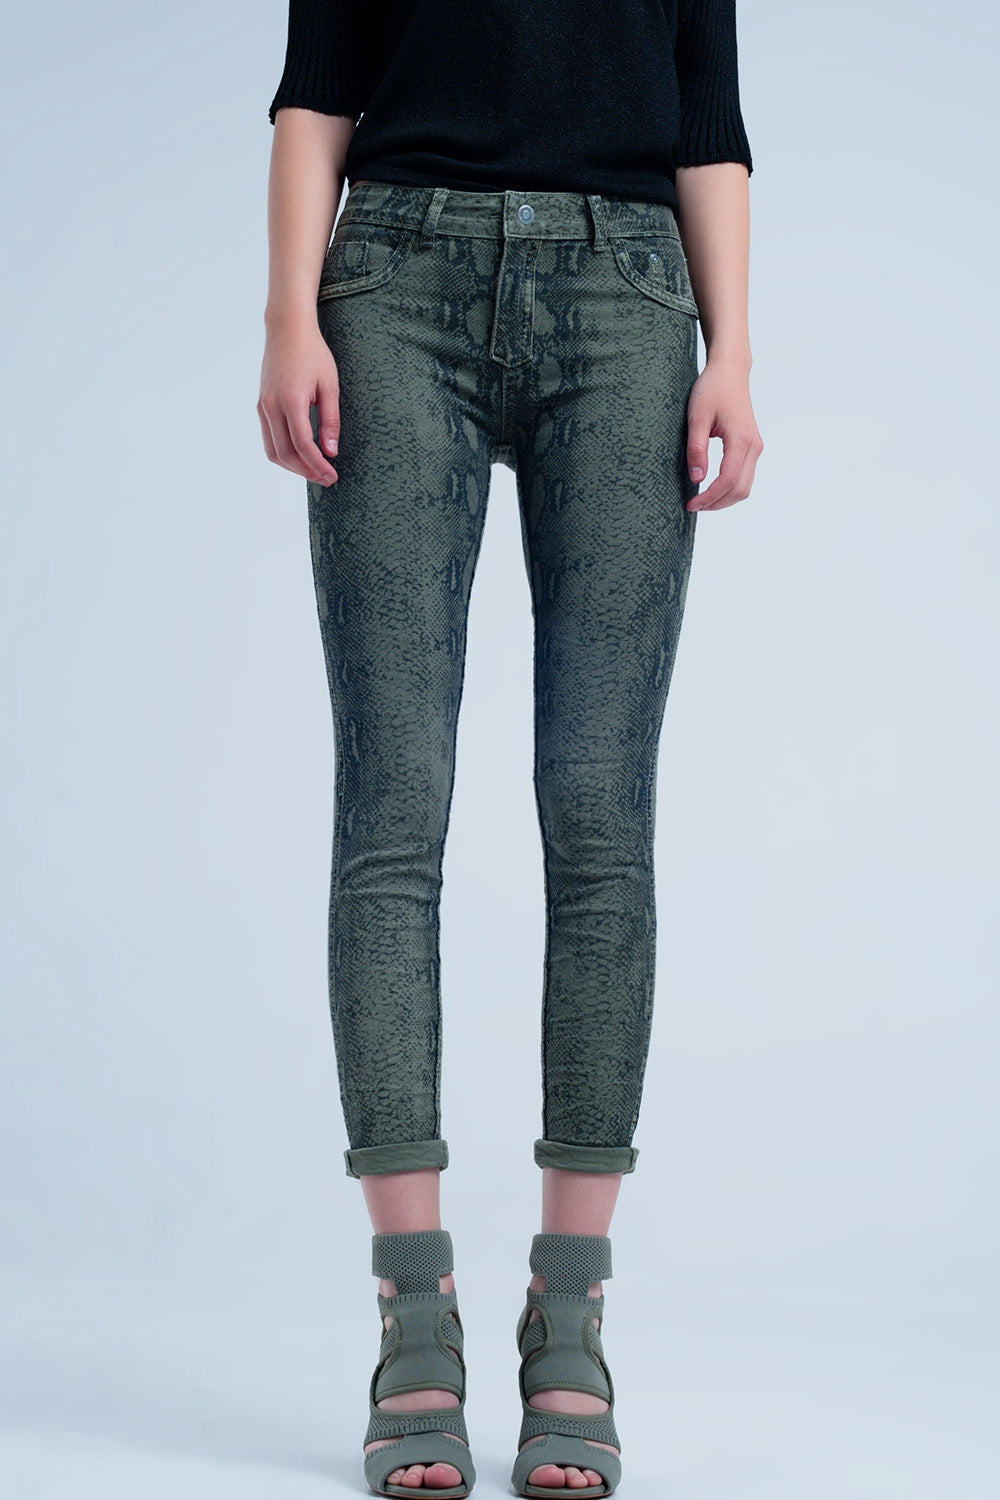 Green skinny reversible jeans with snake printJeans